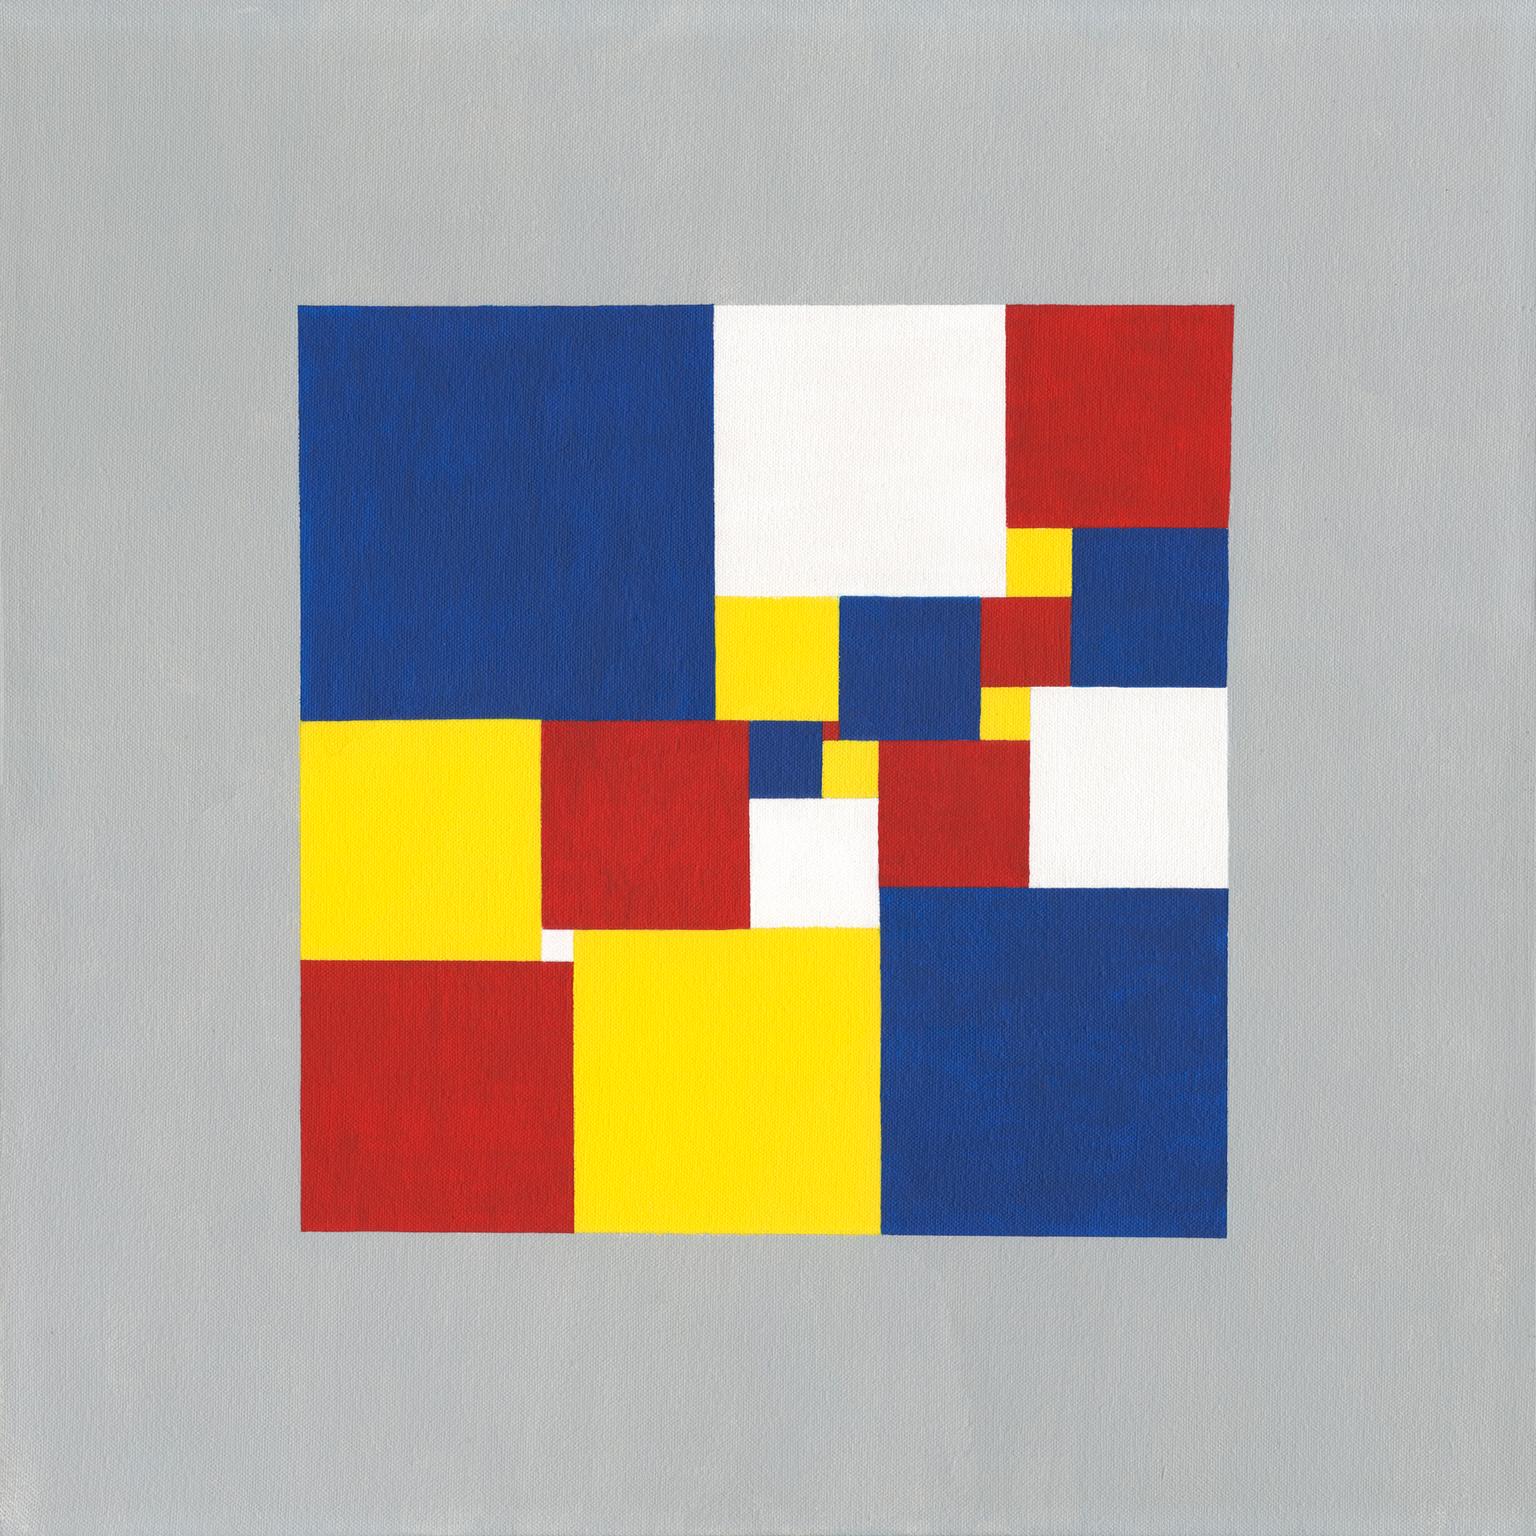 Image for entry 'The Four-Color Simple Perfect Squared Square'